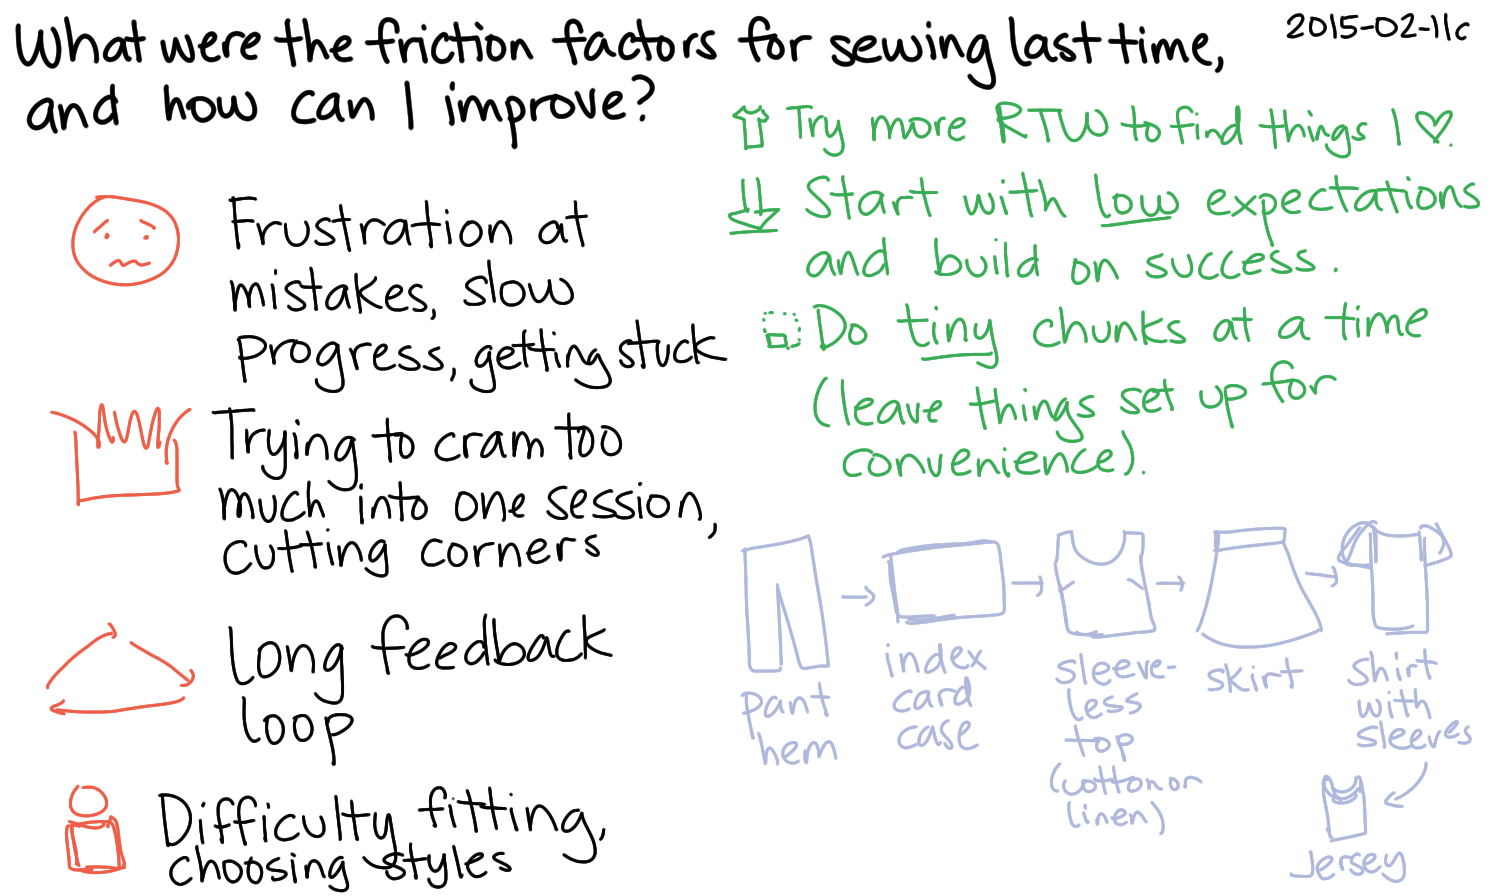 2015-02-11c What were the friction factors for sewing last time, and how can I improve -- index card #sewing #kaizen #reducing-friction